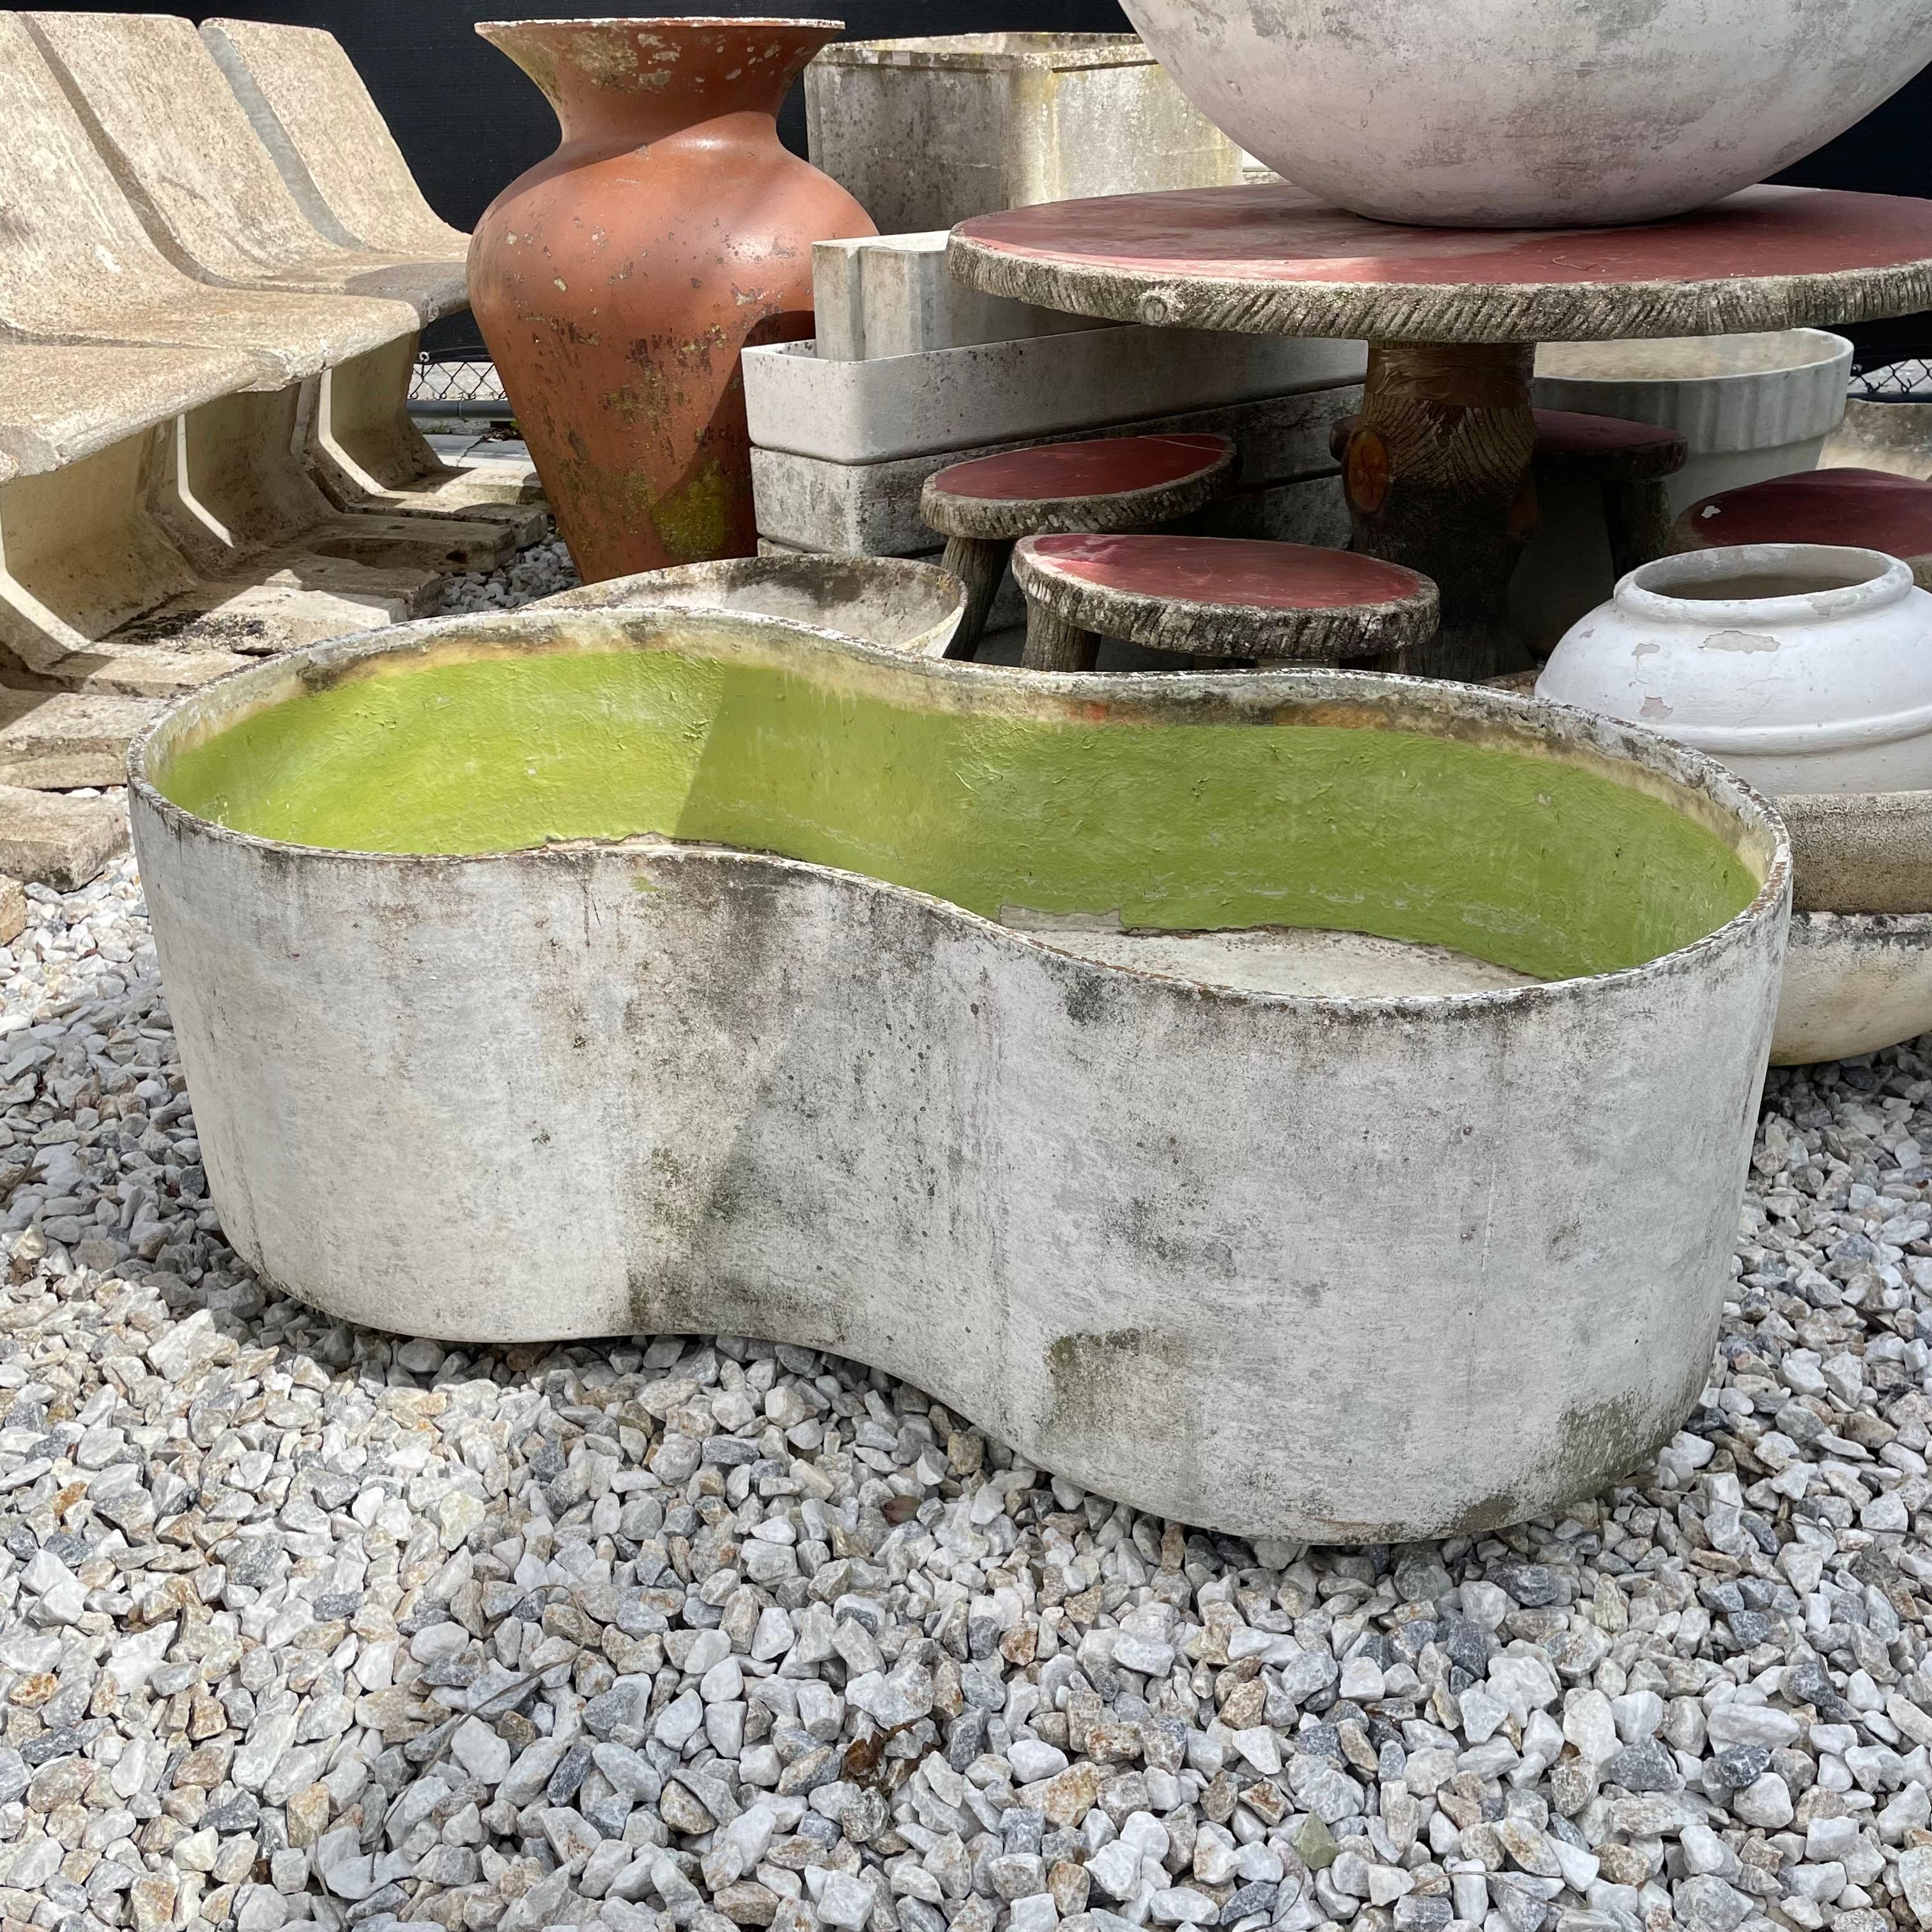 Monumental concrete basin planter by Willy Guhl. Handmade in Switzerland in the 1960s. Just under 4 feet in length. handmade in the shape of a peanut. Powerful presence and patina with a retro slime green interior making this piece eye catching and